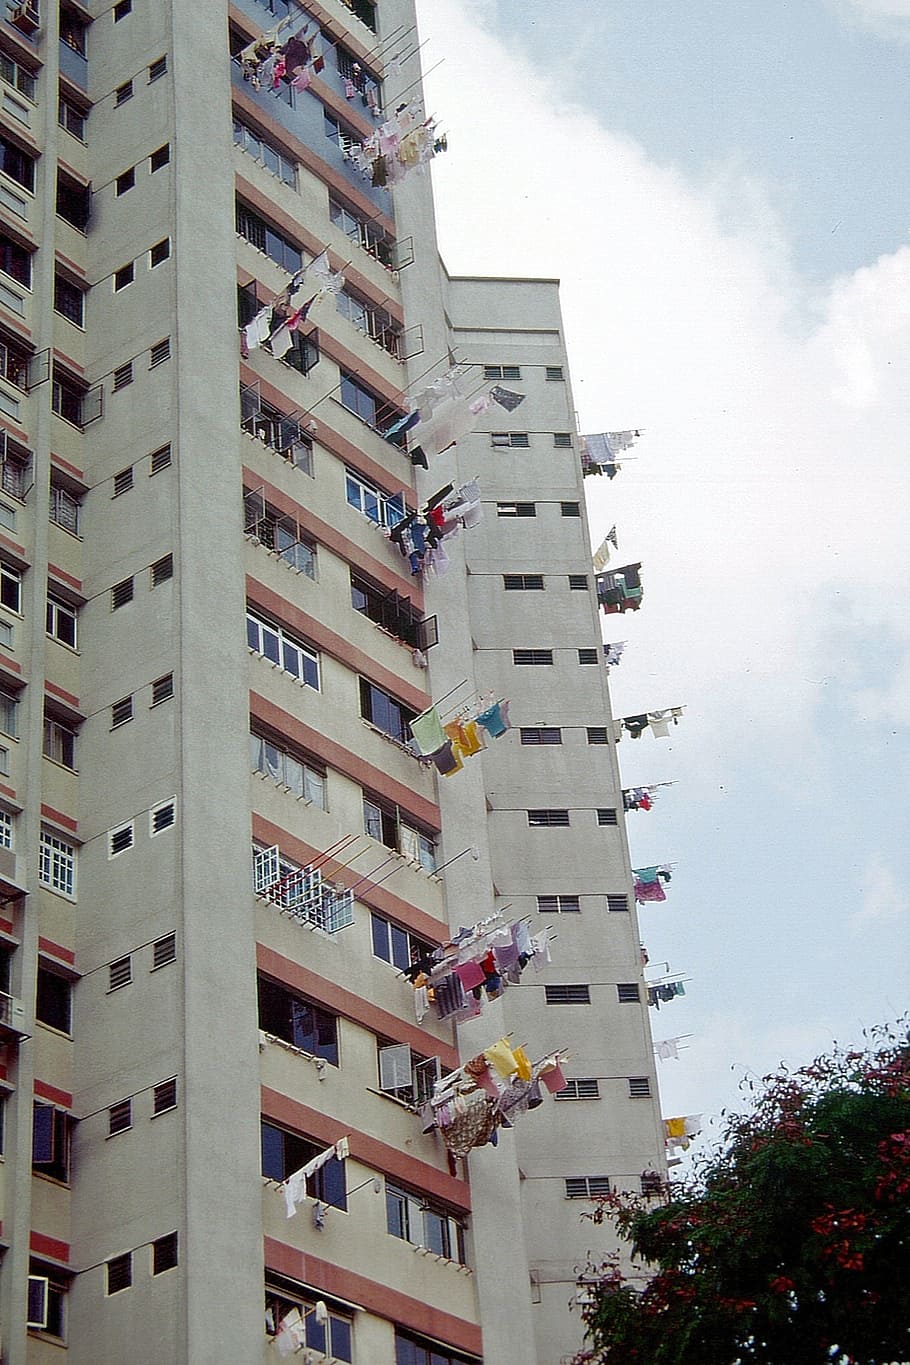 laundry, dry, skyscraper, clotheslines, hang, dry laundry, garments, asia, singapore, building exterior